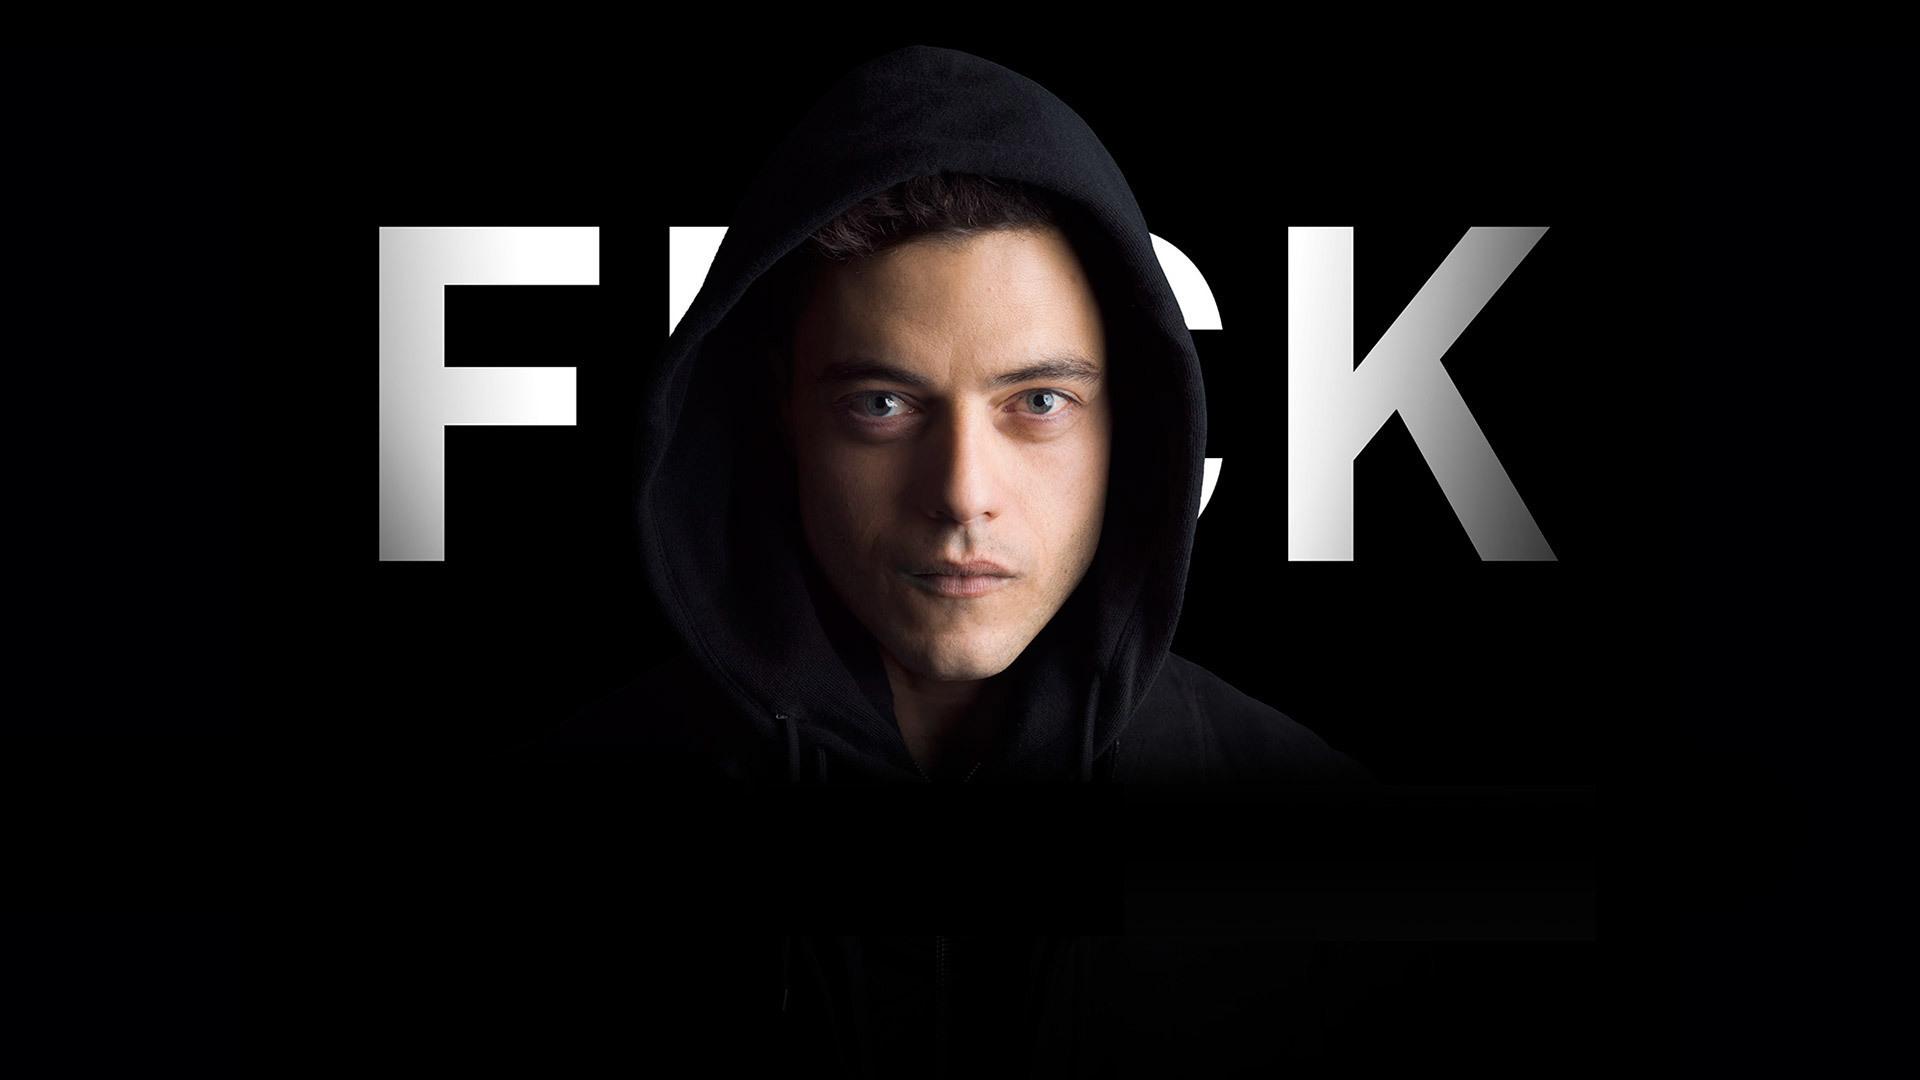 Mr. Robot Wallpaper, Picture, Image